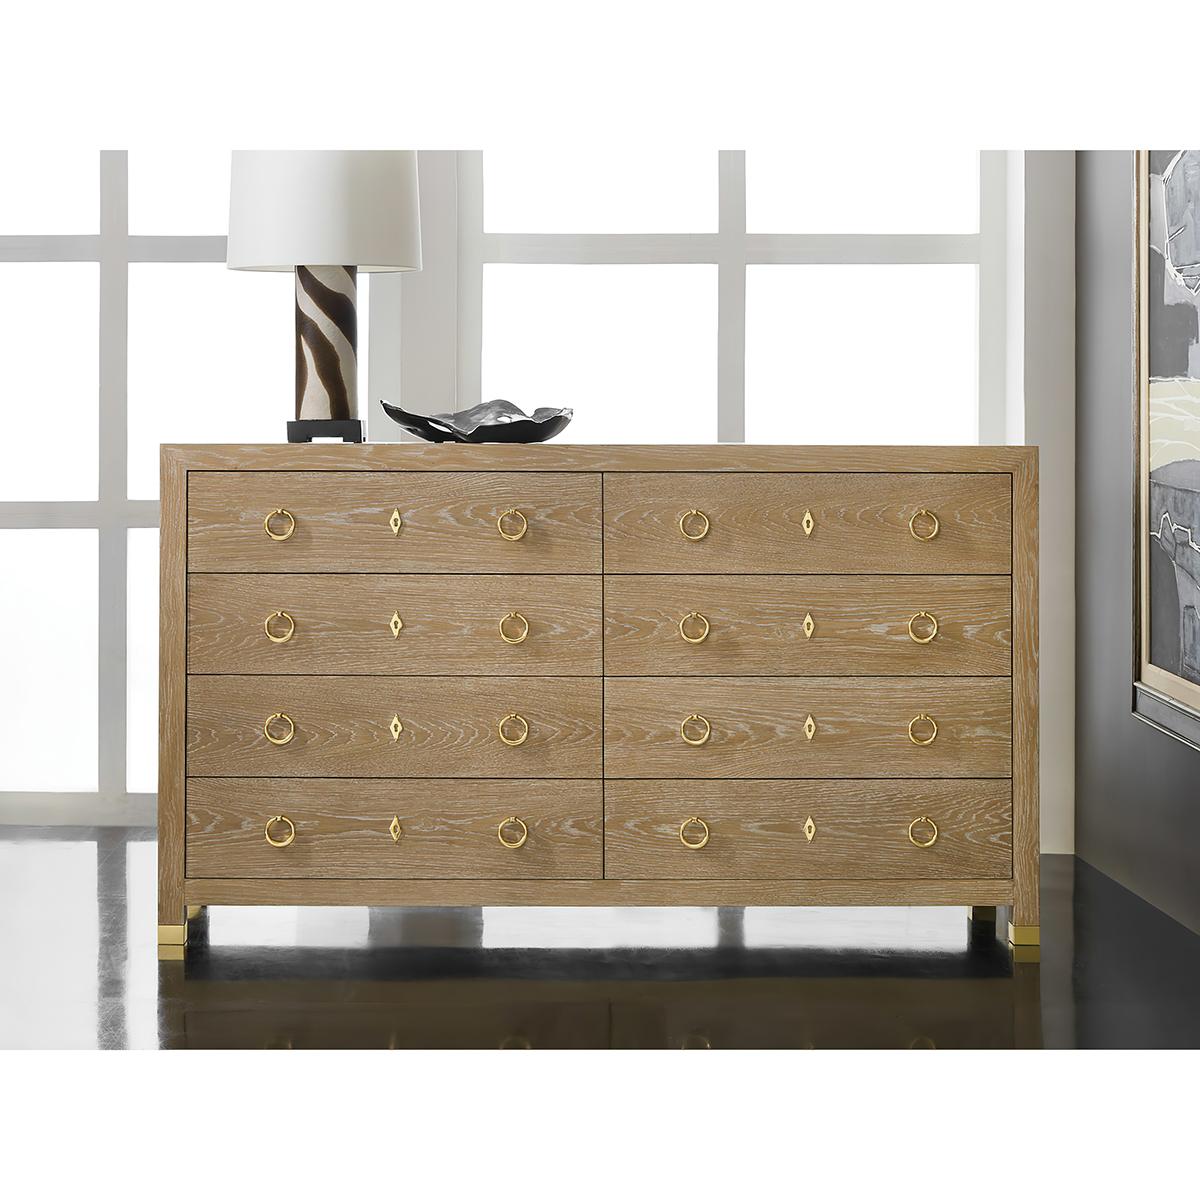 Light Oak Modern Dresser with a light whitewashed oak finish, has a simple cubist geometric form with eight drawers, each with soft closing mechanisms and polished brass ring pulls. The Square case has square brass feet. The dresser is expertly